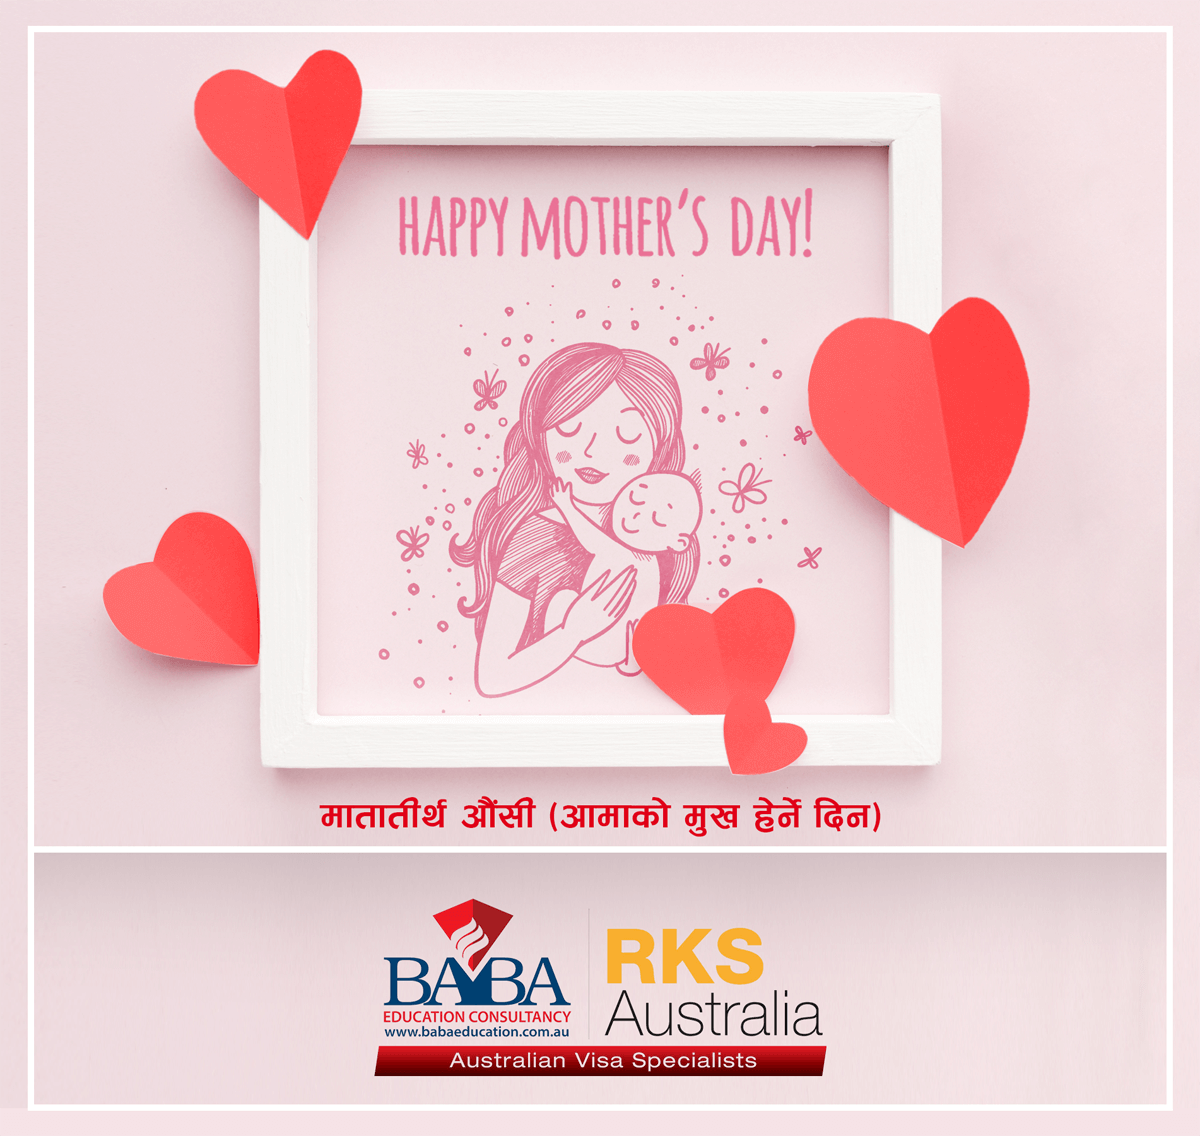 Happy Mothers Day - Baba Education Consultancy